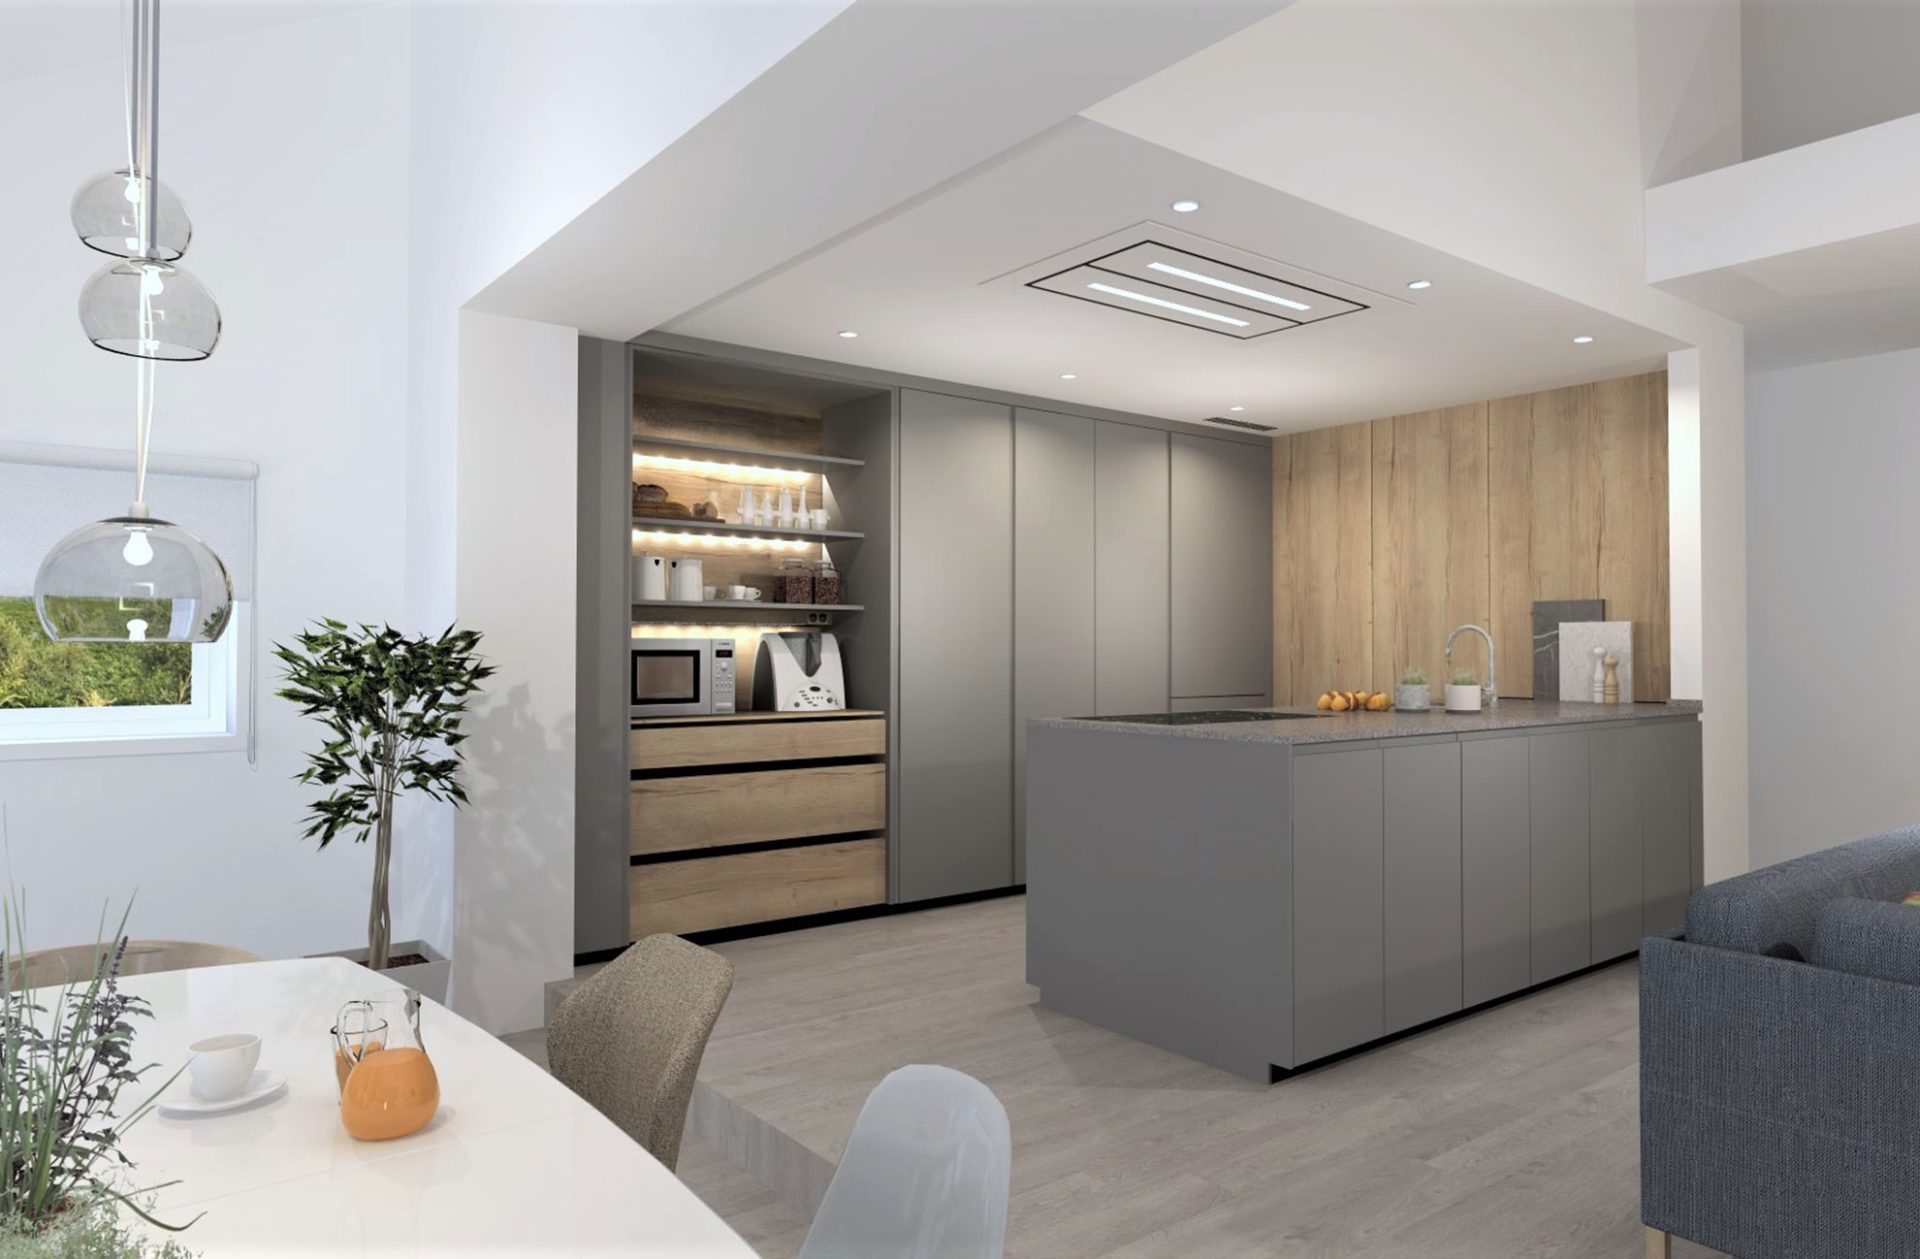 3D open-plan galley kitchen layout in grey and wood tones, separated from the living and dining areas by a peninsula.